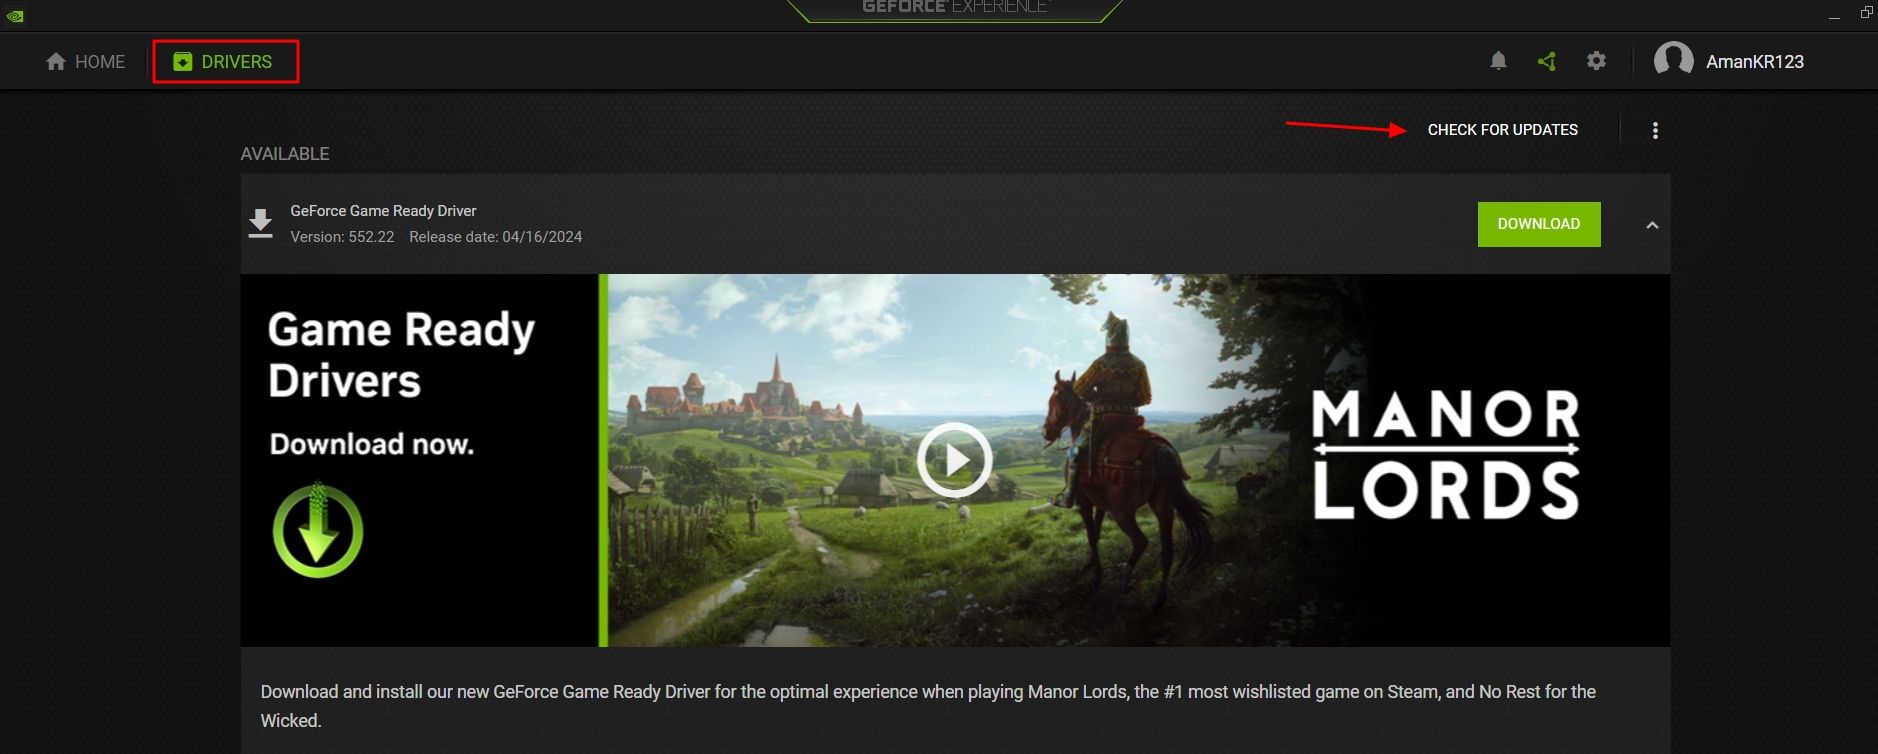 Check for Updates option in the GeForce Experience app.